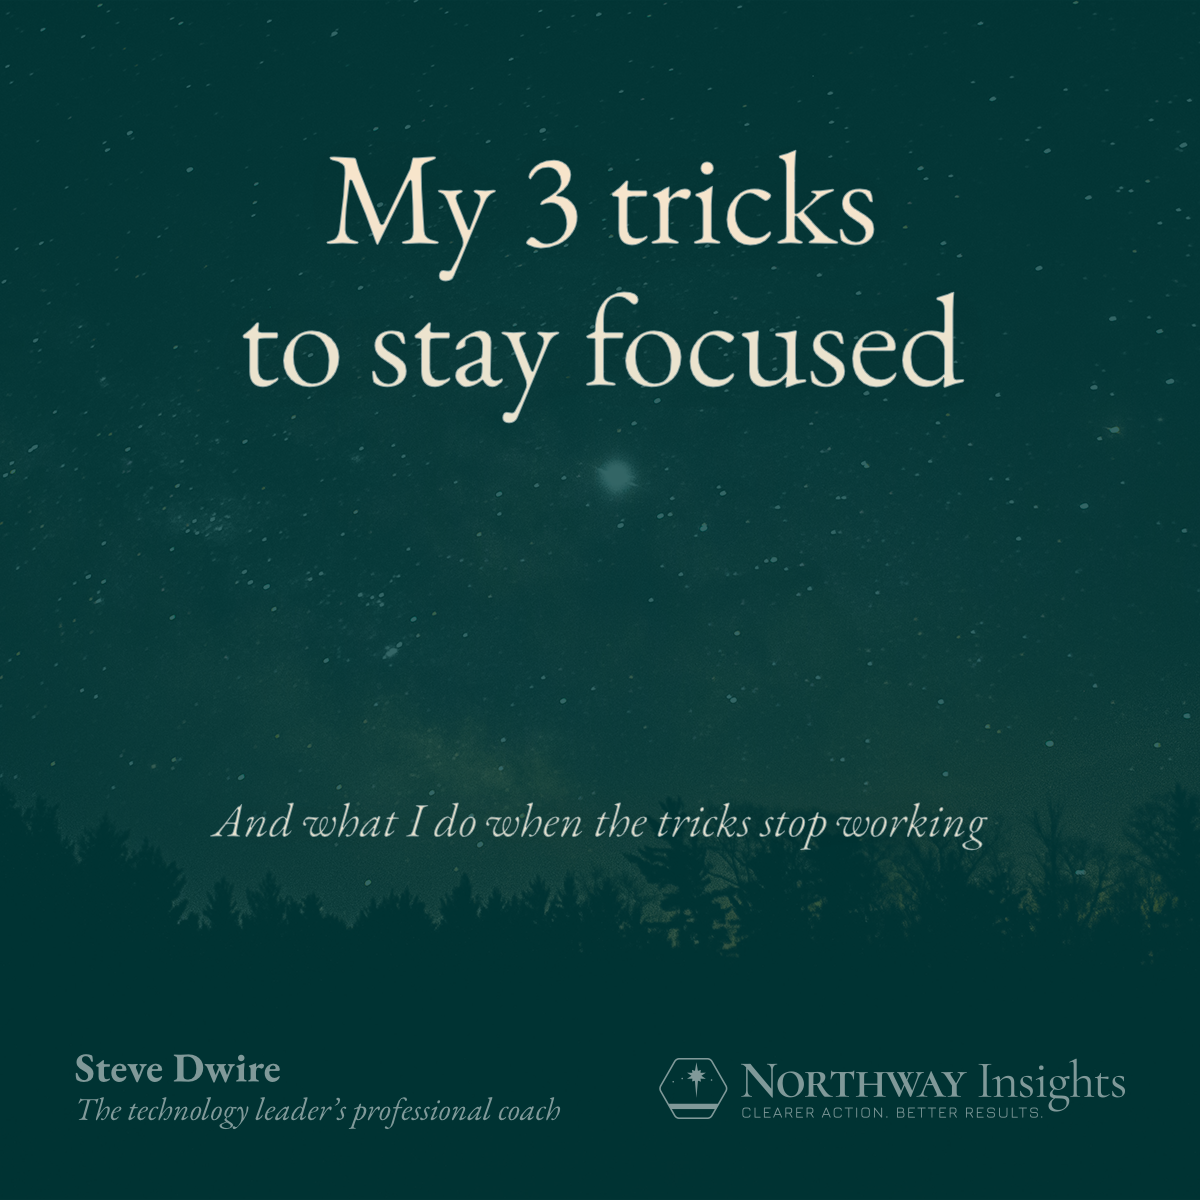 My 3 tricks to stay focused, and what I do when the tricks stop working.